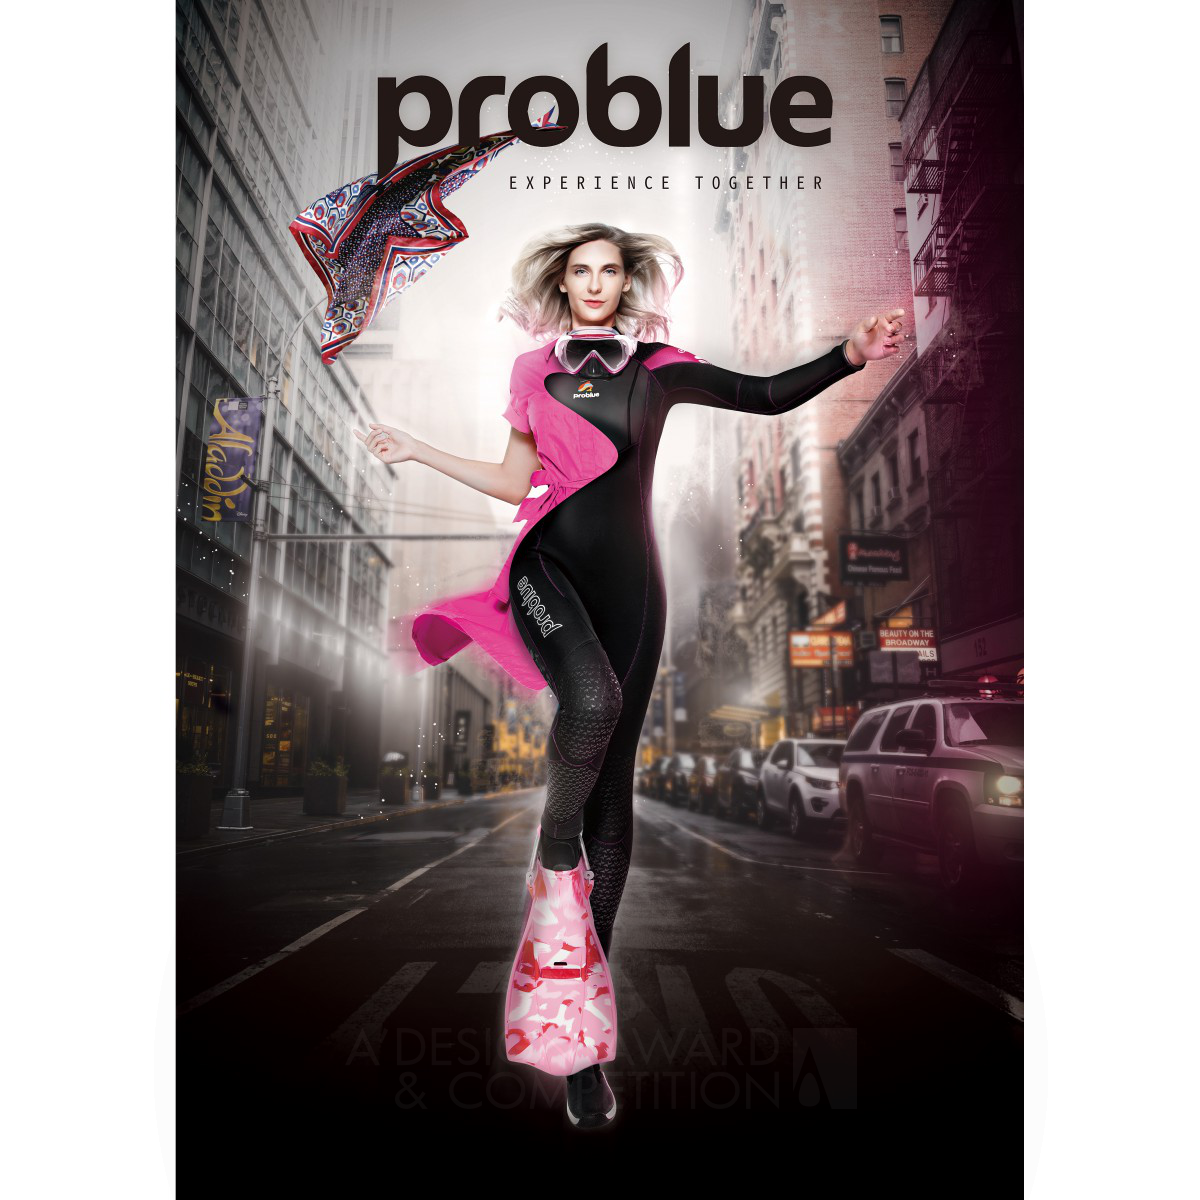 Problue Poster by JBBC BRANDING CONSULTANCY